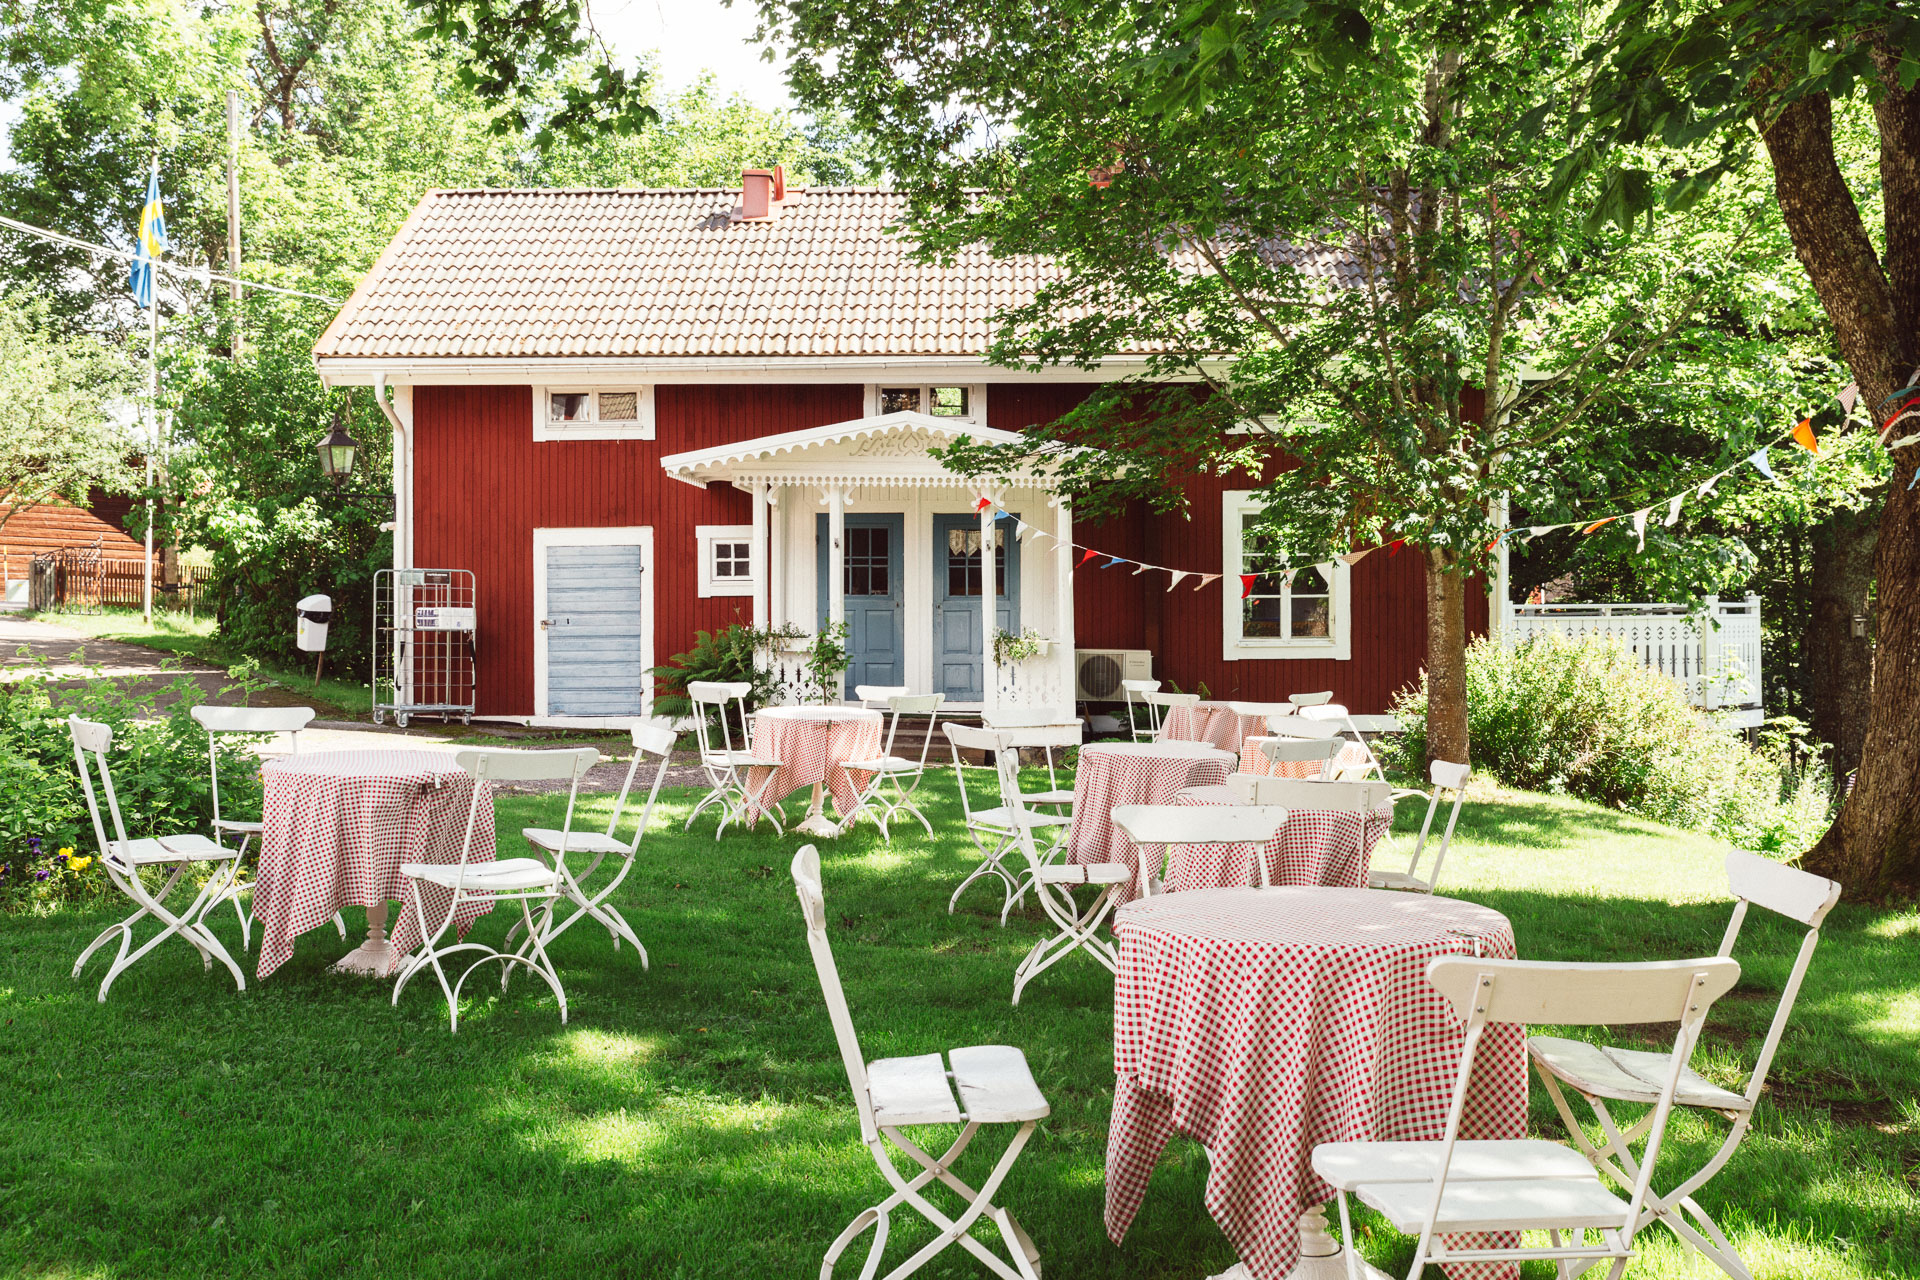 The color of this house (and many others in sweden!) is called falun red.